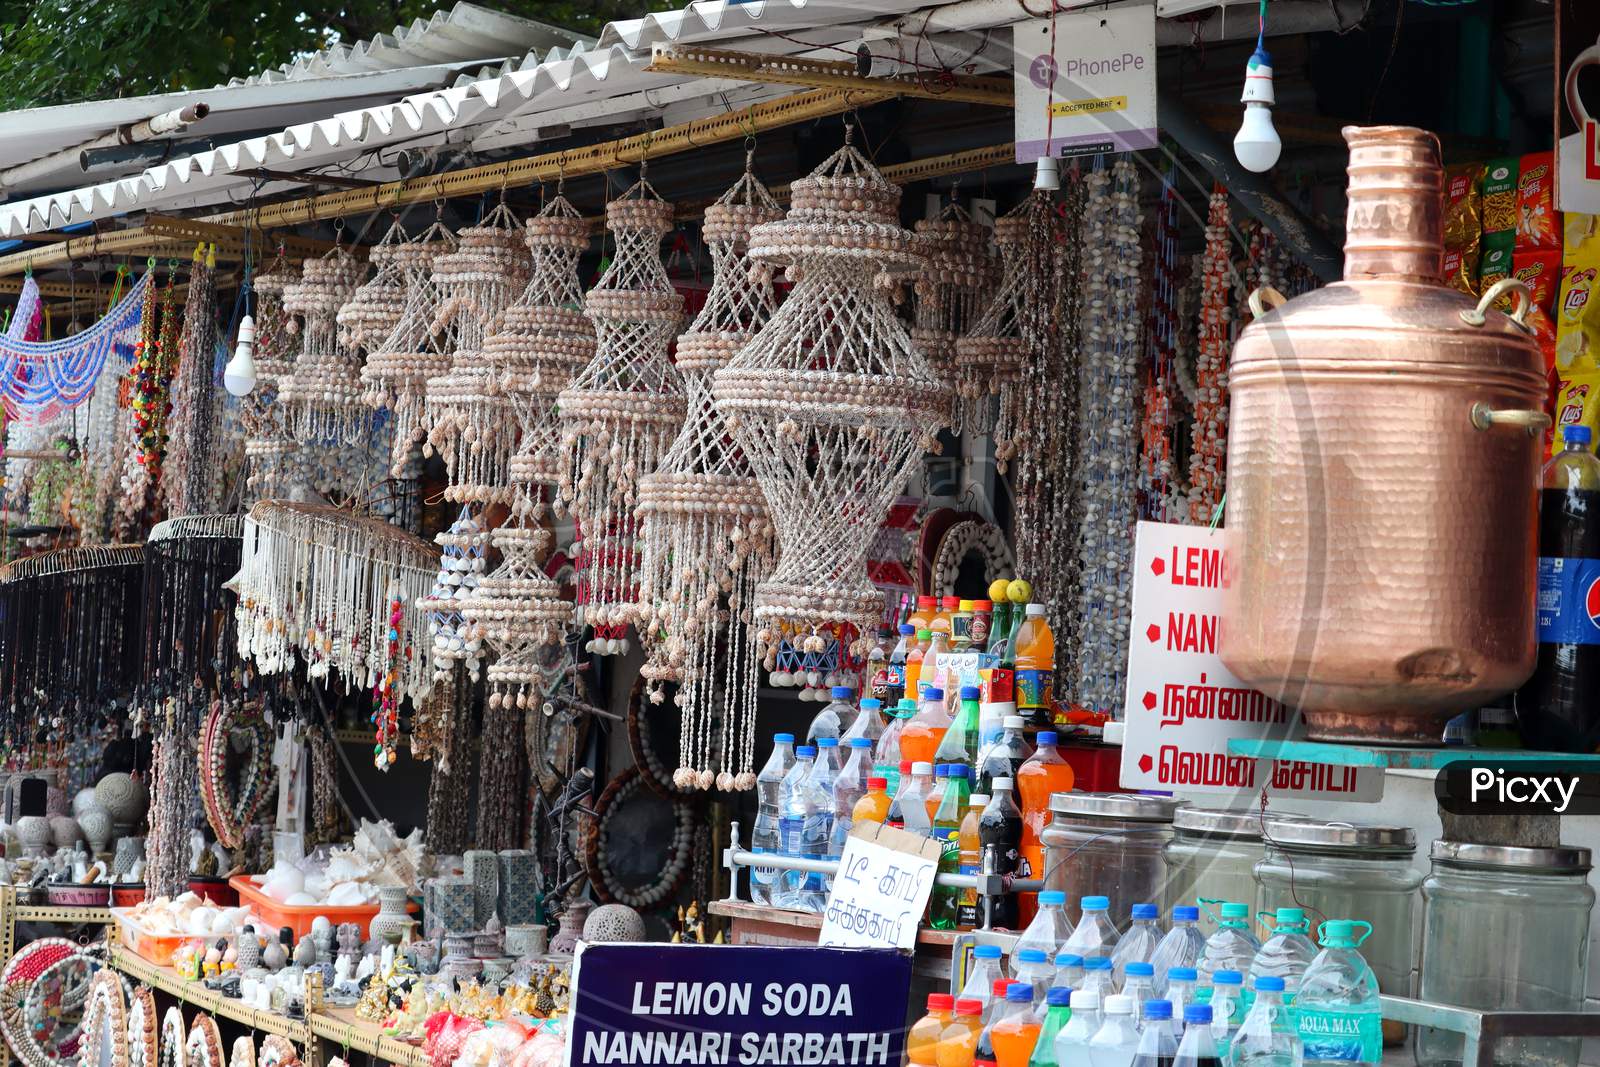 Decorative Products Made Of Sea Shell Decorated In The Retail Shop In The Market For The Business Of Upcoming Festivals